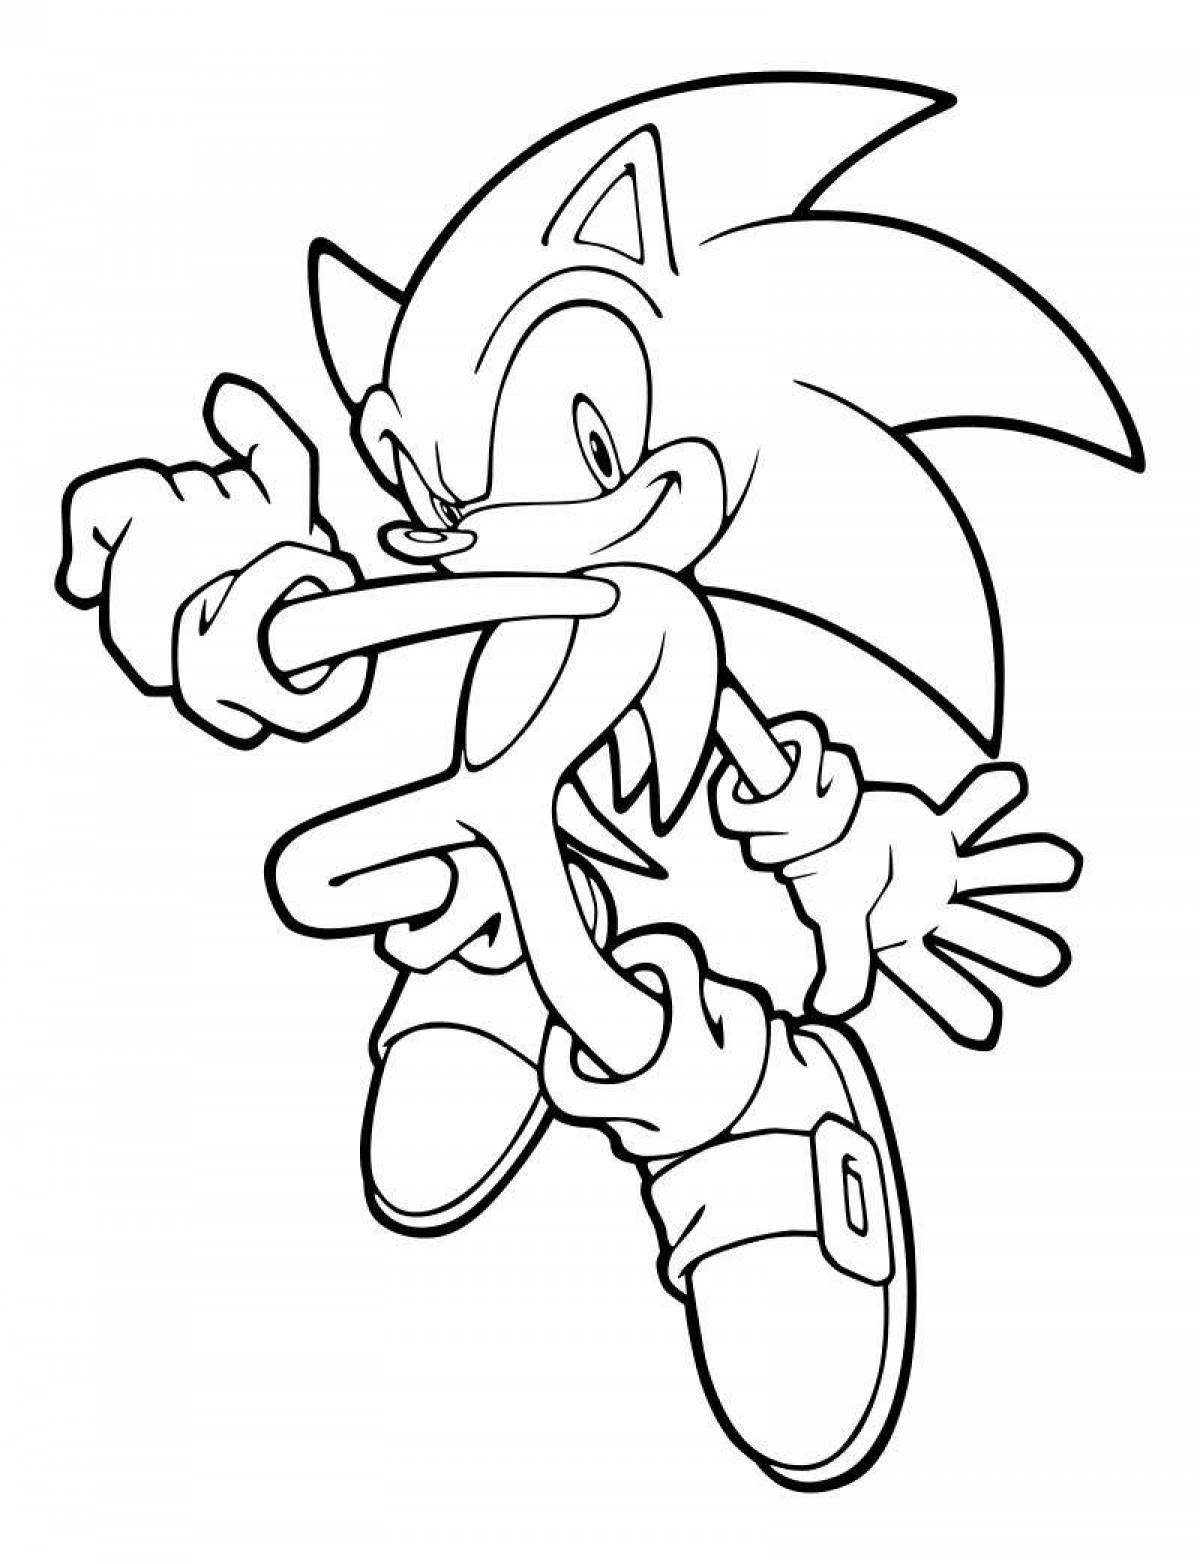 Glitter golden sonic coloring page